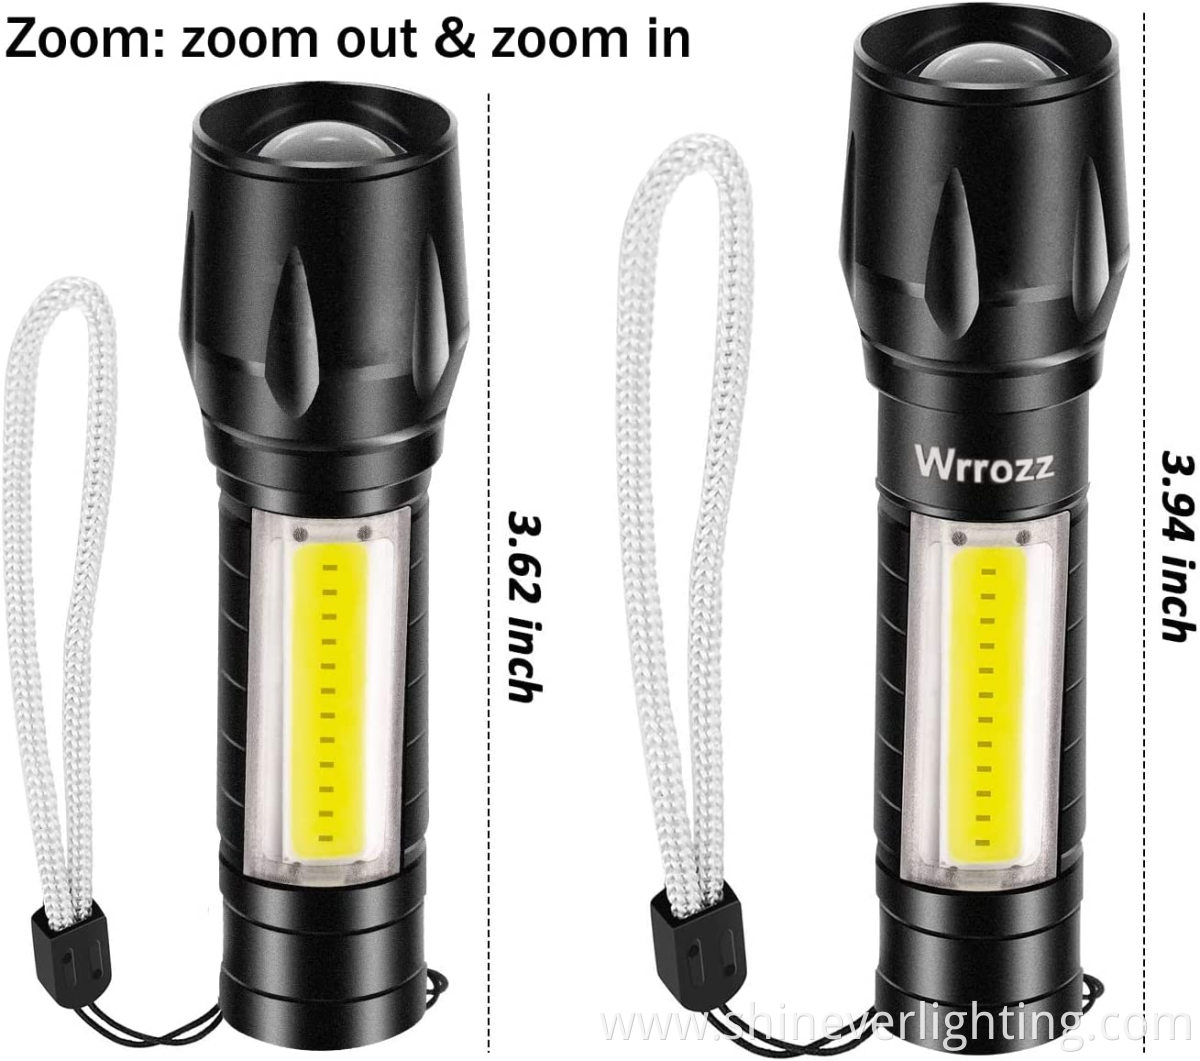 Portable USB rechargeable torch light